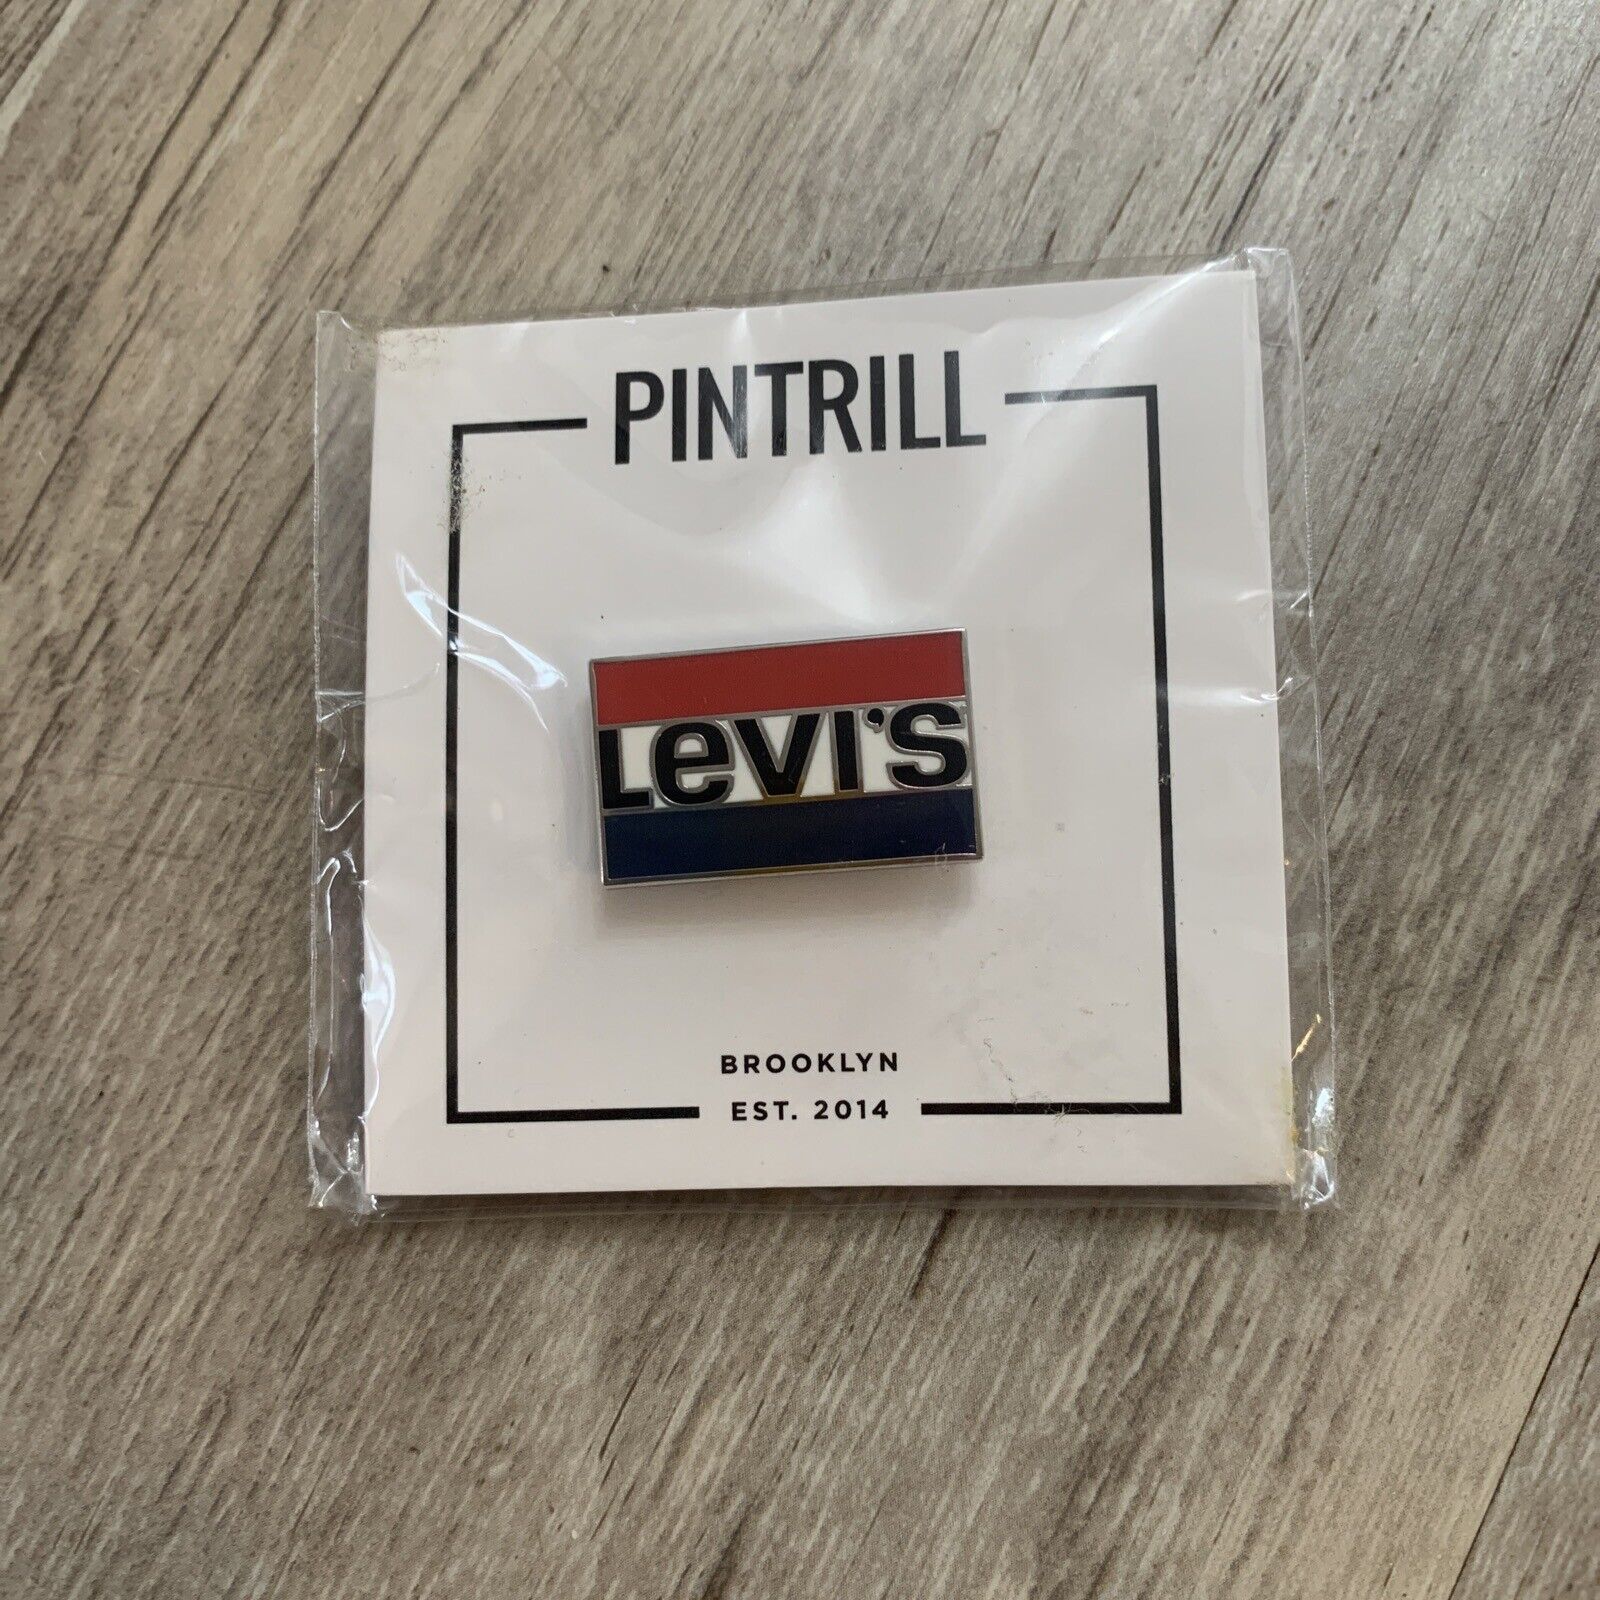 ⚡RARE⚡ PINTRILL x LEVI'S Logo Levi's Pin *BRAND NEW SEALED* LIMITED EDITION